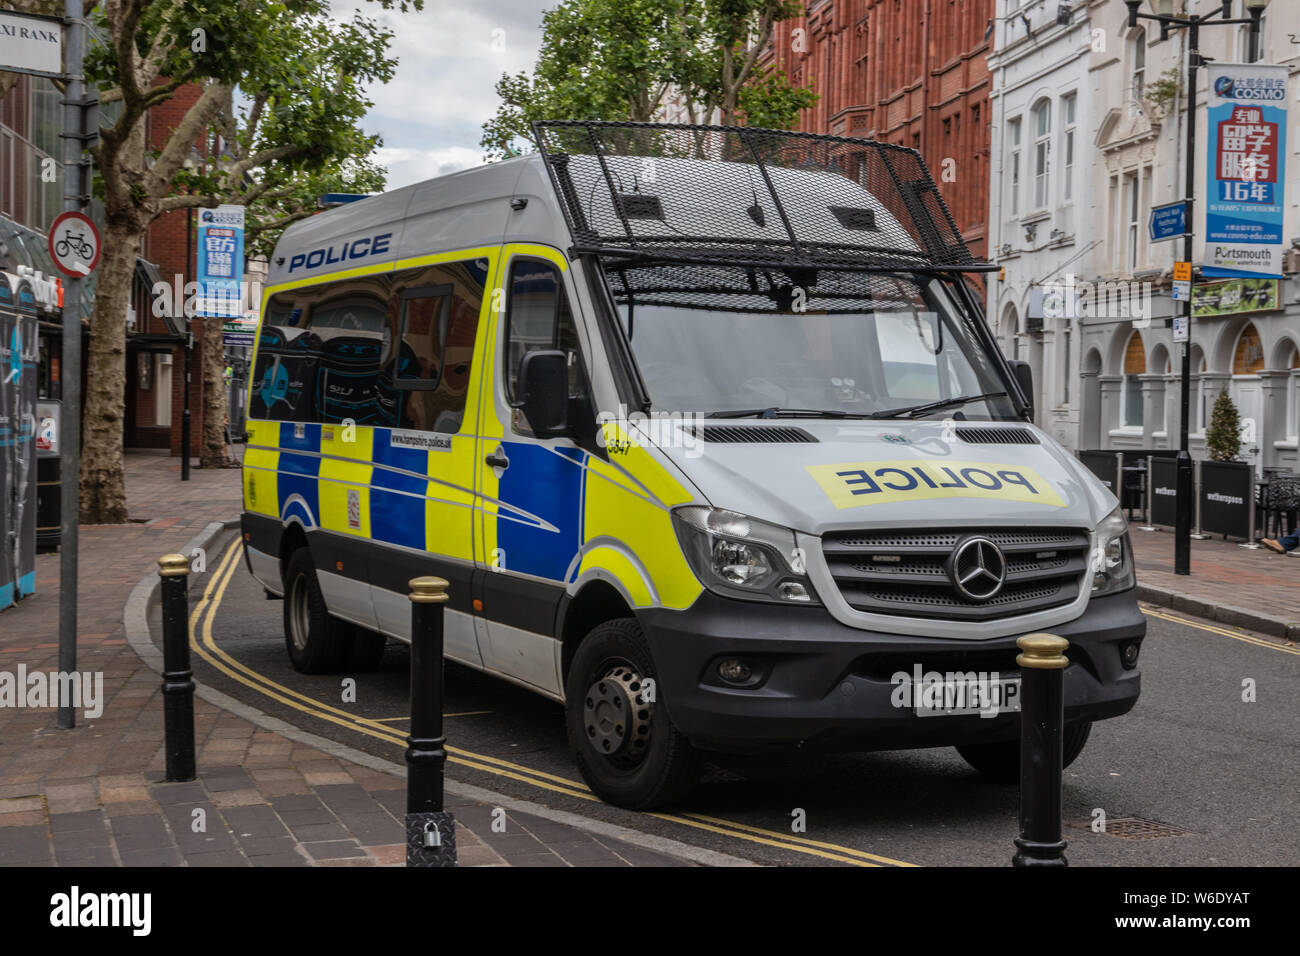 A British police van or meat wagon with windshield protectors in an English road Stock Photo